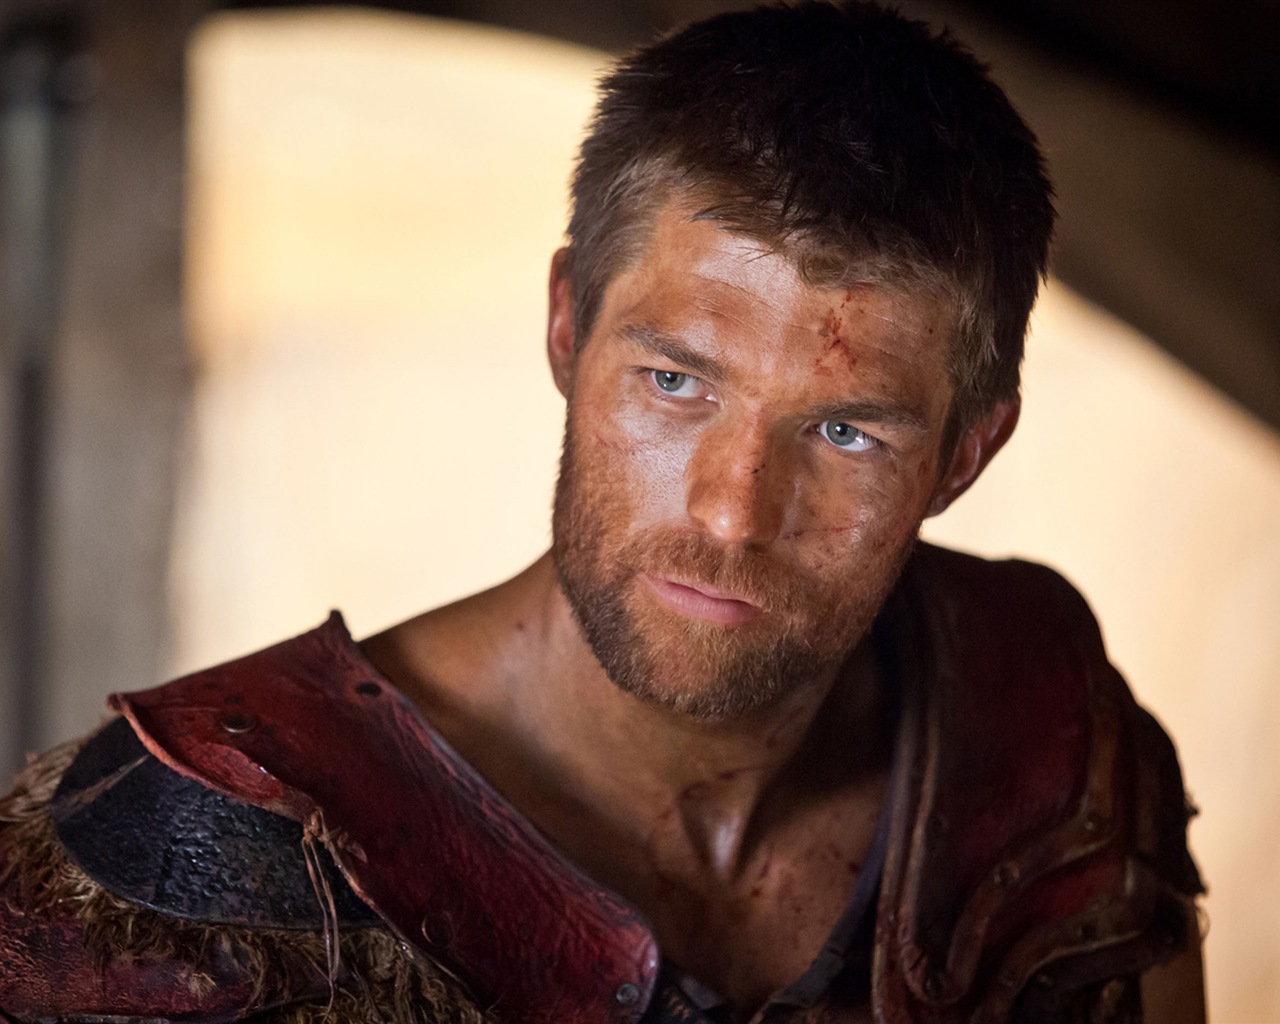 Spartacus: War of the Damned HD wallpapers #11 - 1280x1024